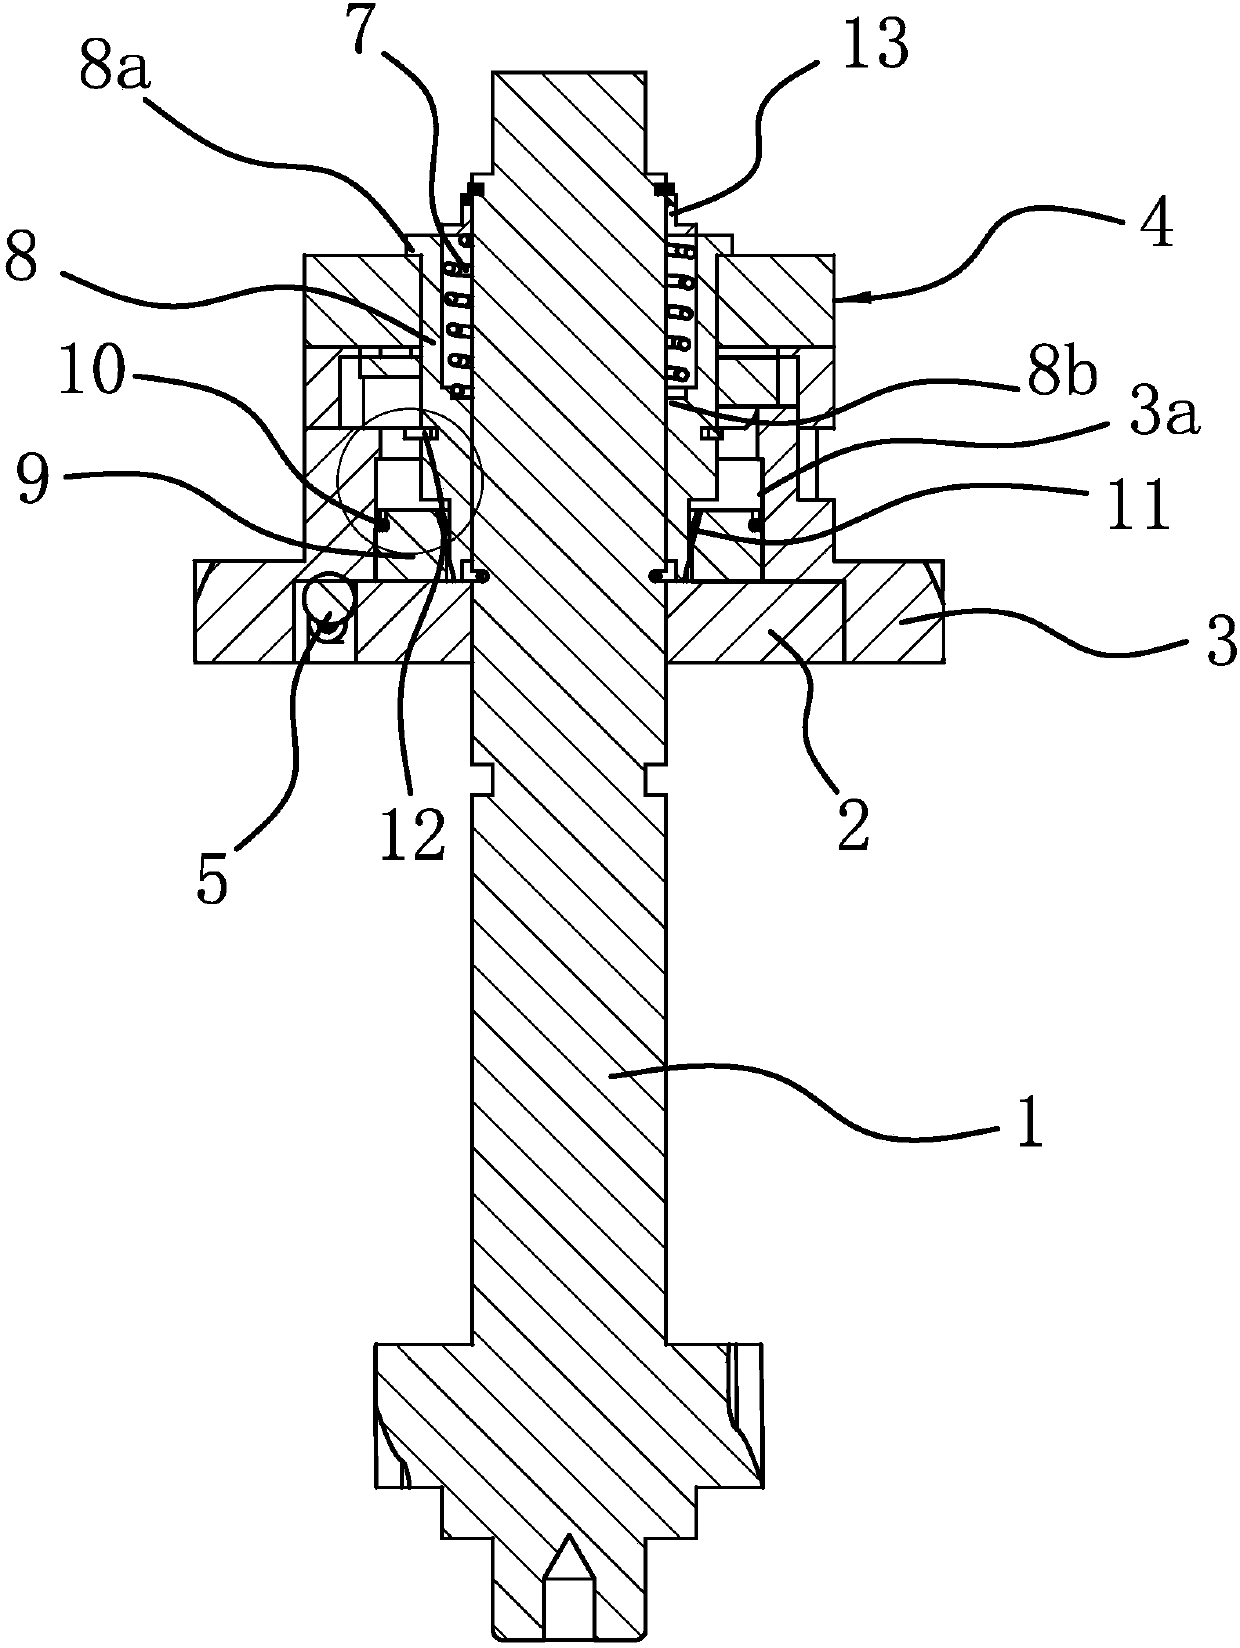 Transmission mechanism of two-way variable-speed motor